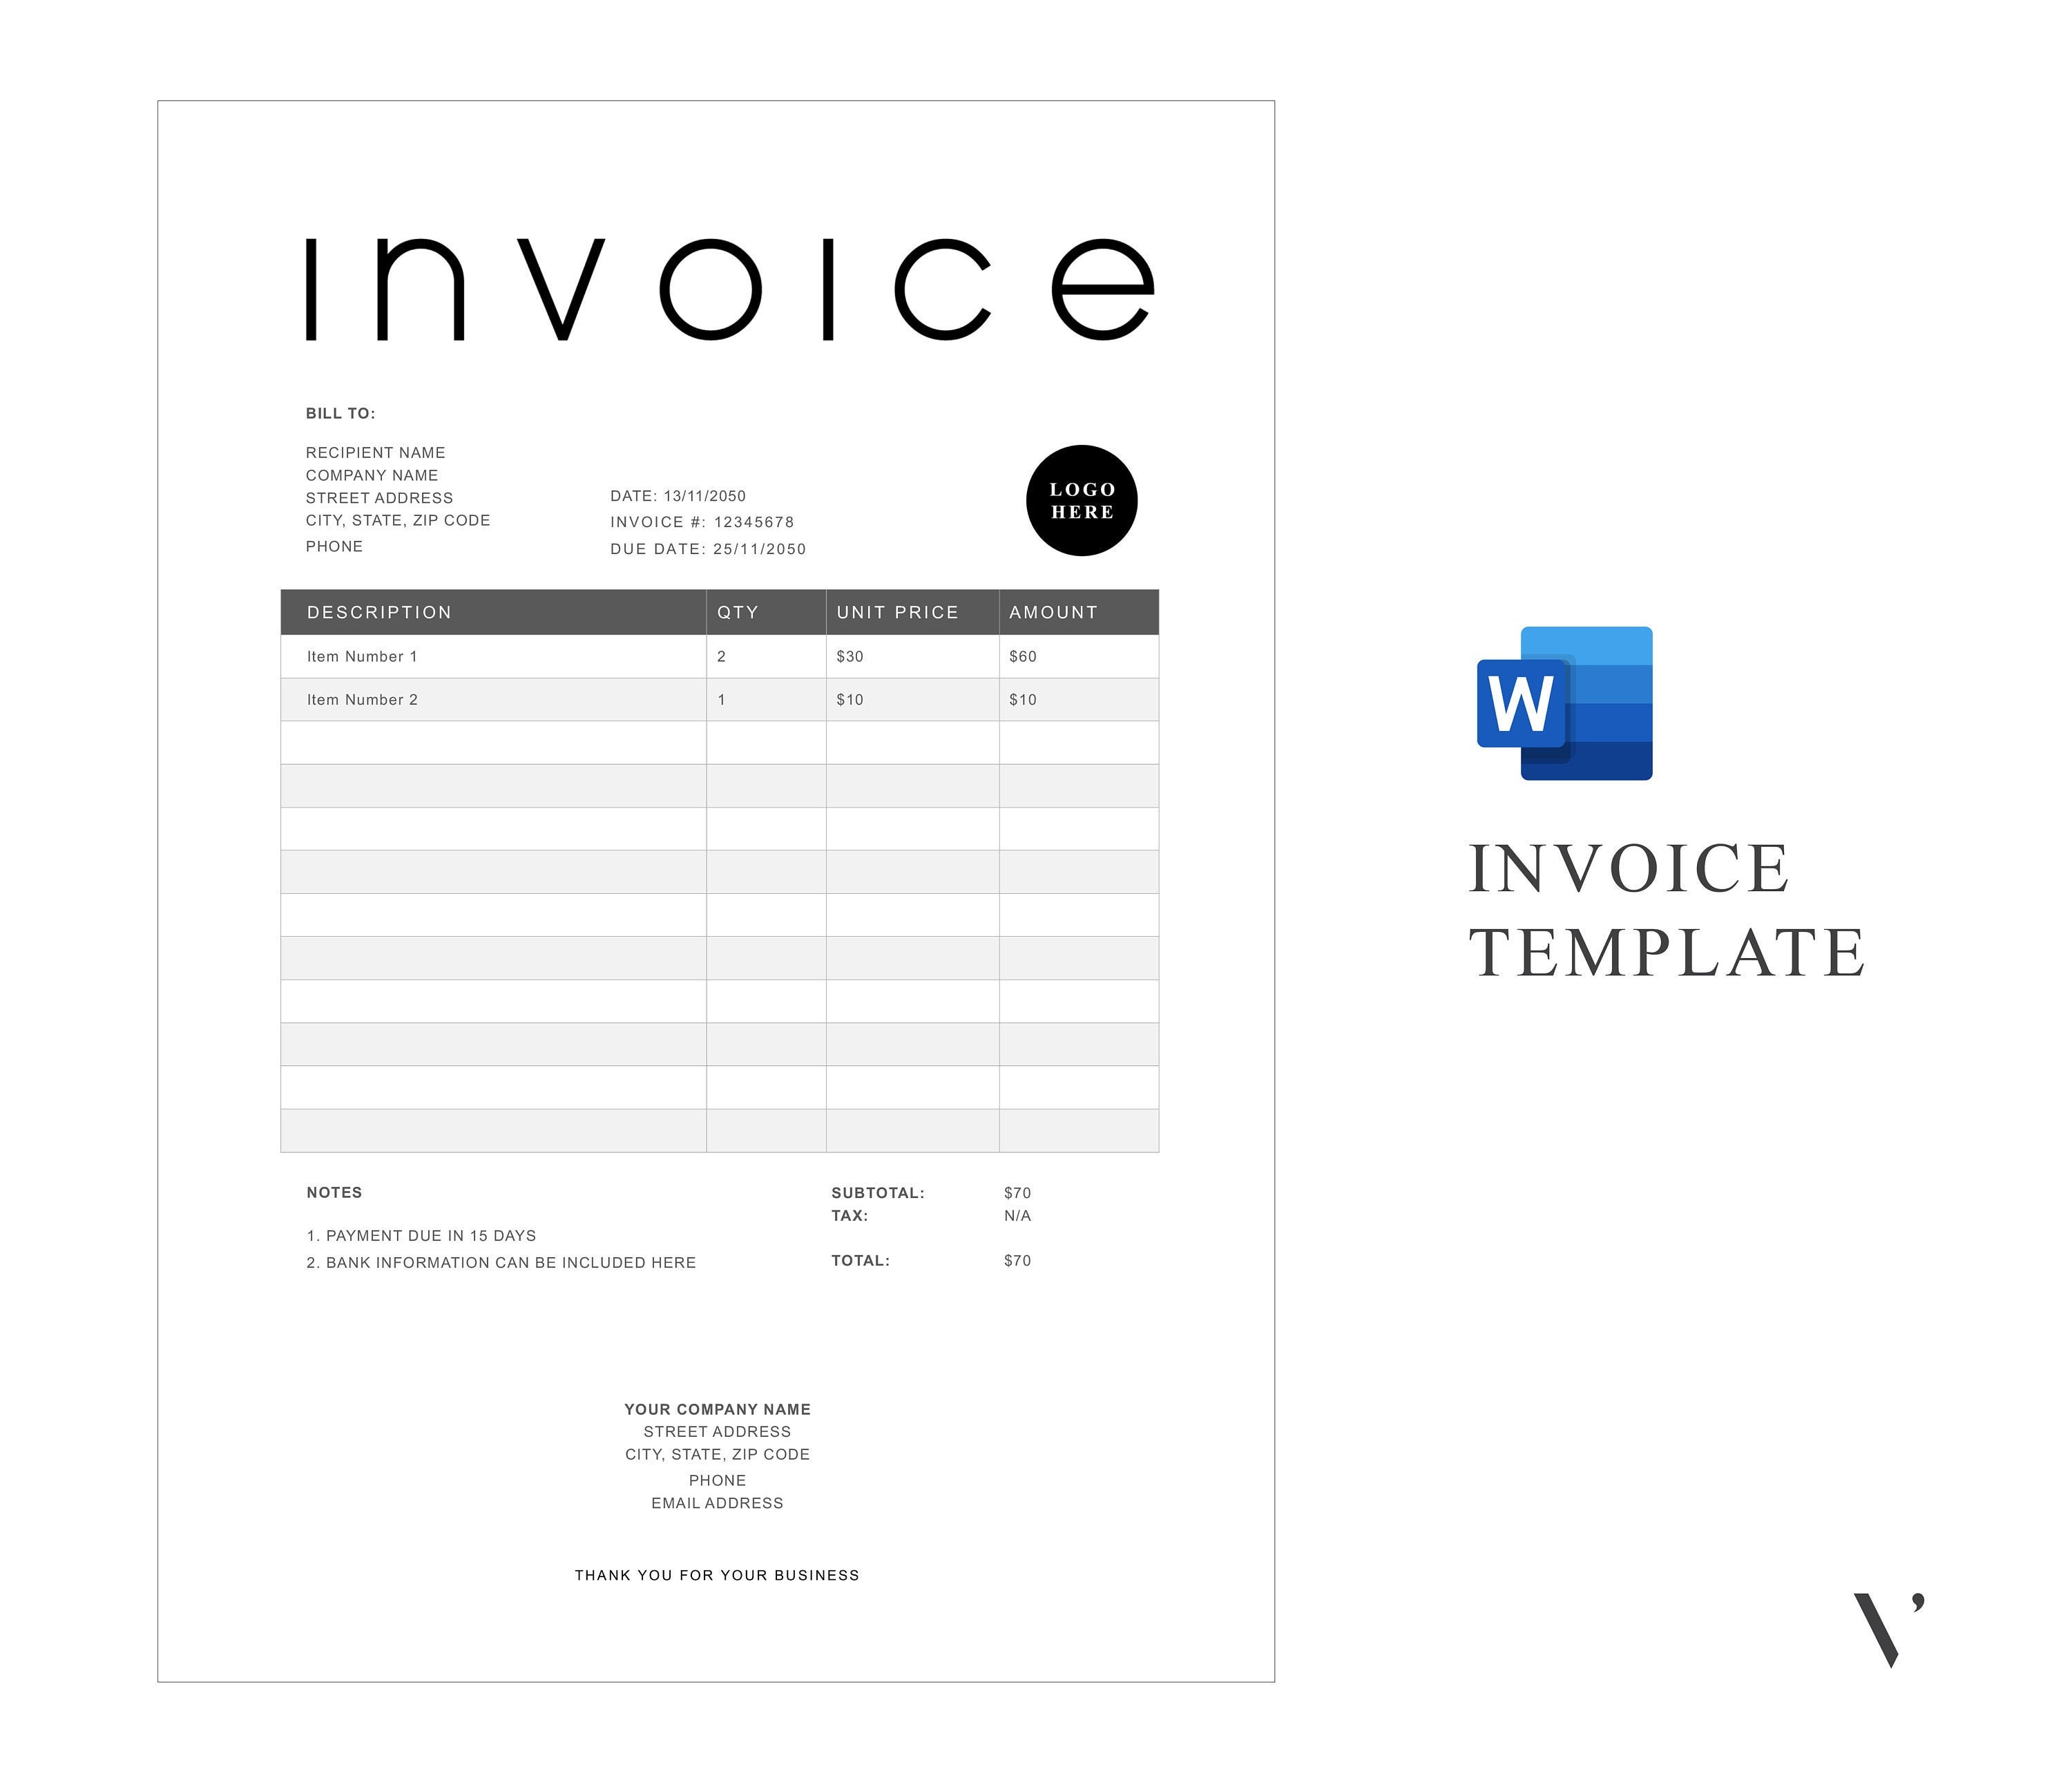 invoice-template-word-printable-invoice-custom-order-forms-etsy